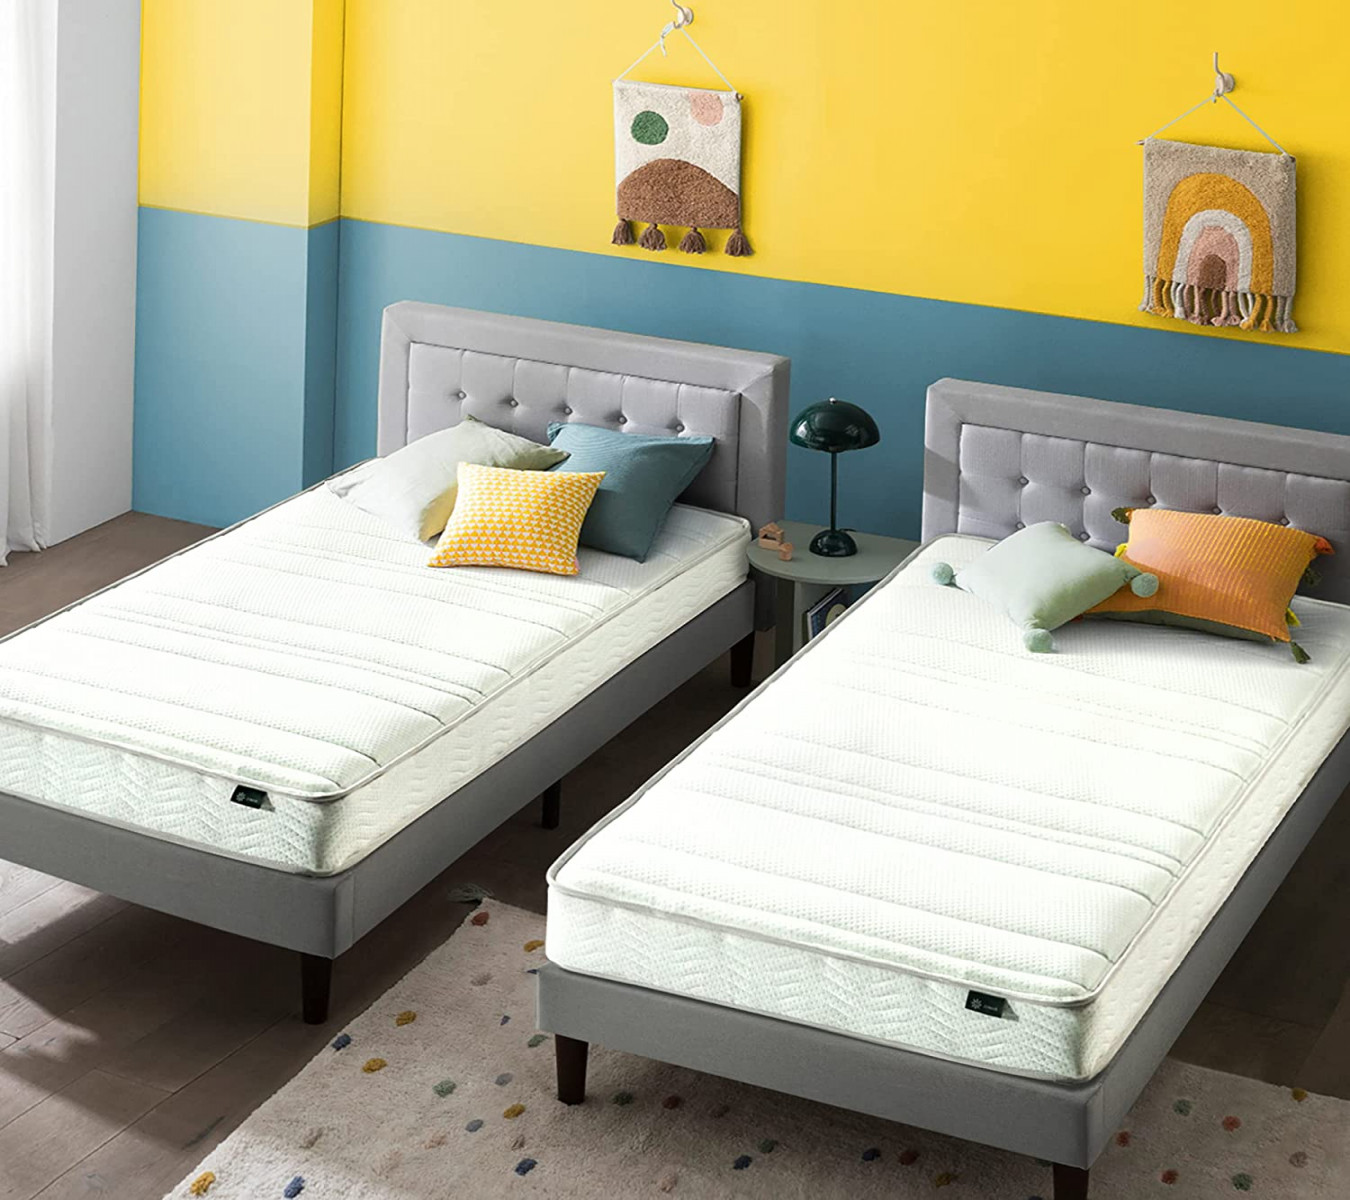 Twin Beds With Mattress